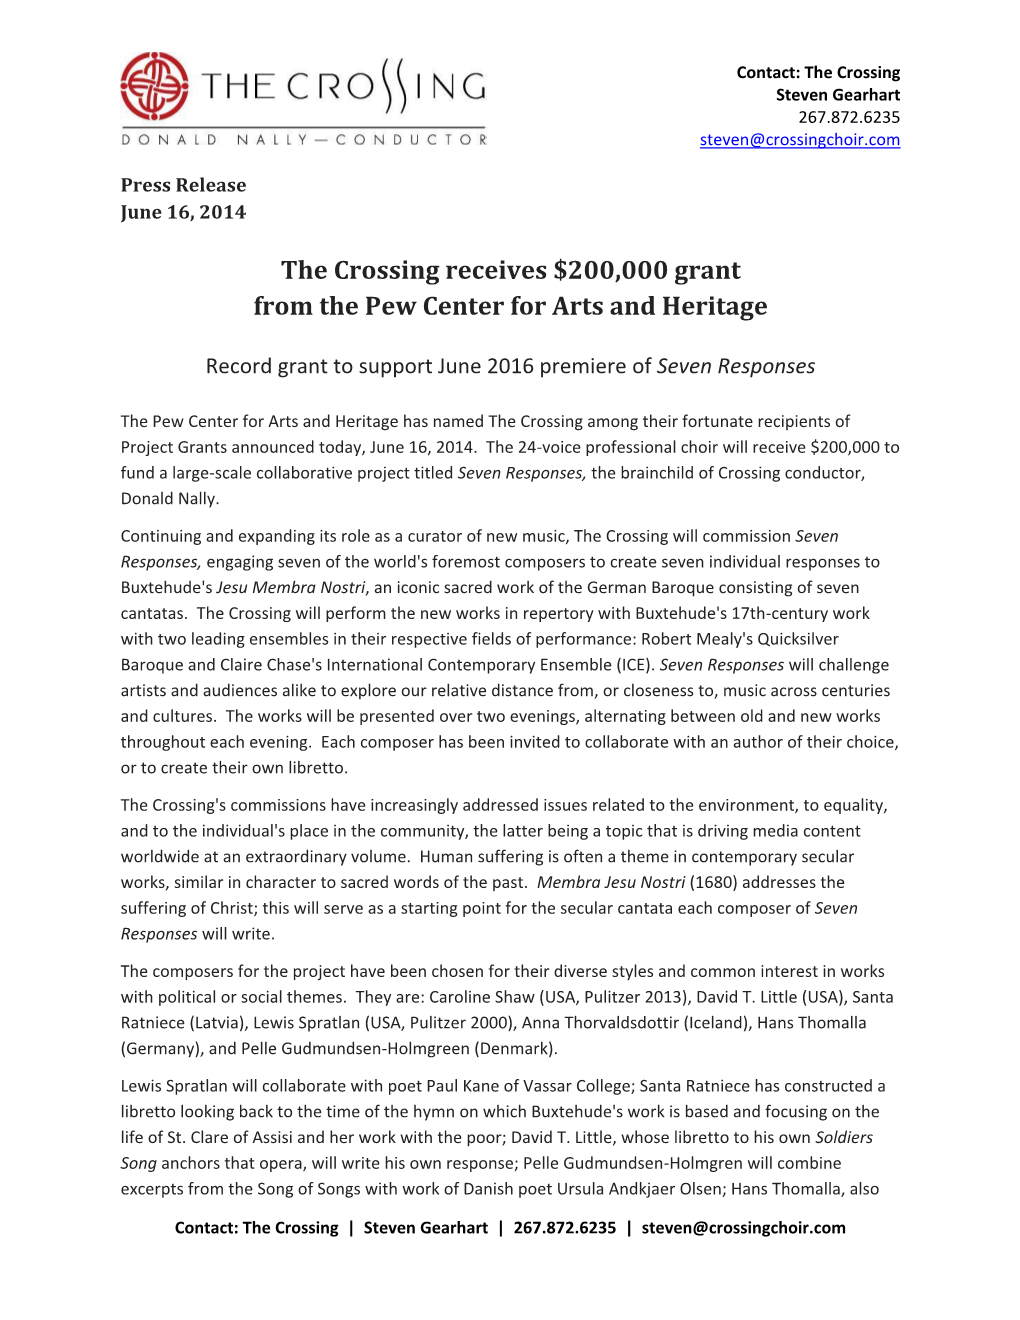 The Crossing Receives $200,000 Grant from the Pew Center for Arts and Heritage